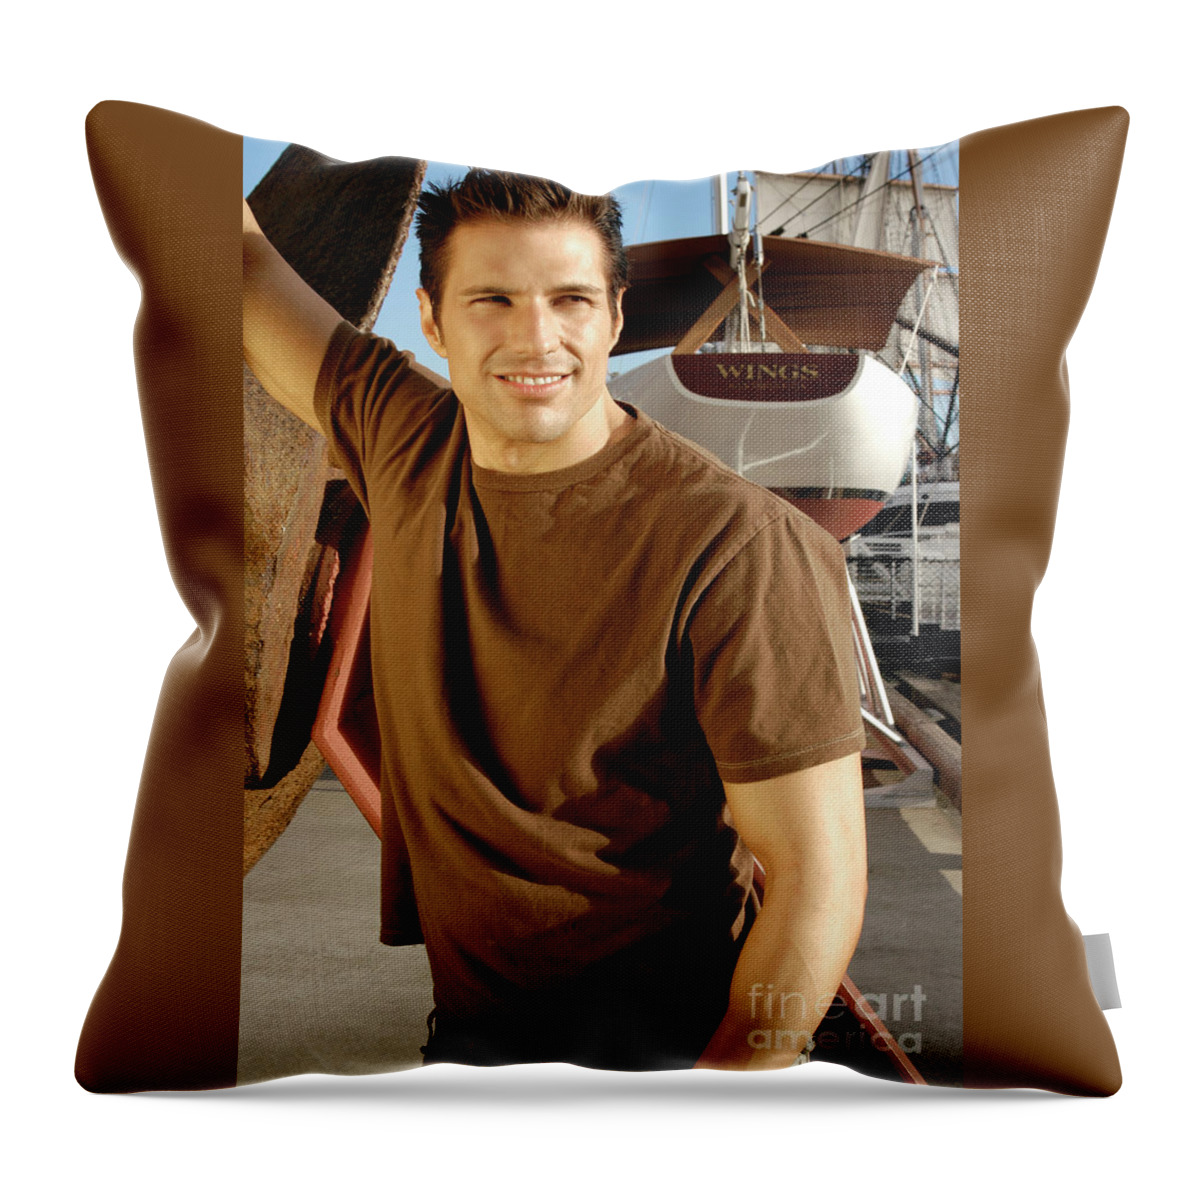 Sailor Throw Pillow featuring the photograph Handsome muscular sailor posing for a portrait photo. by Gunther Allen